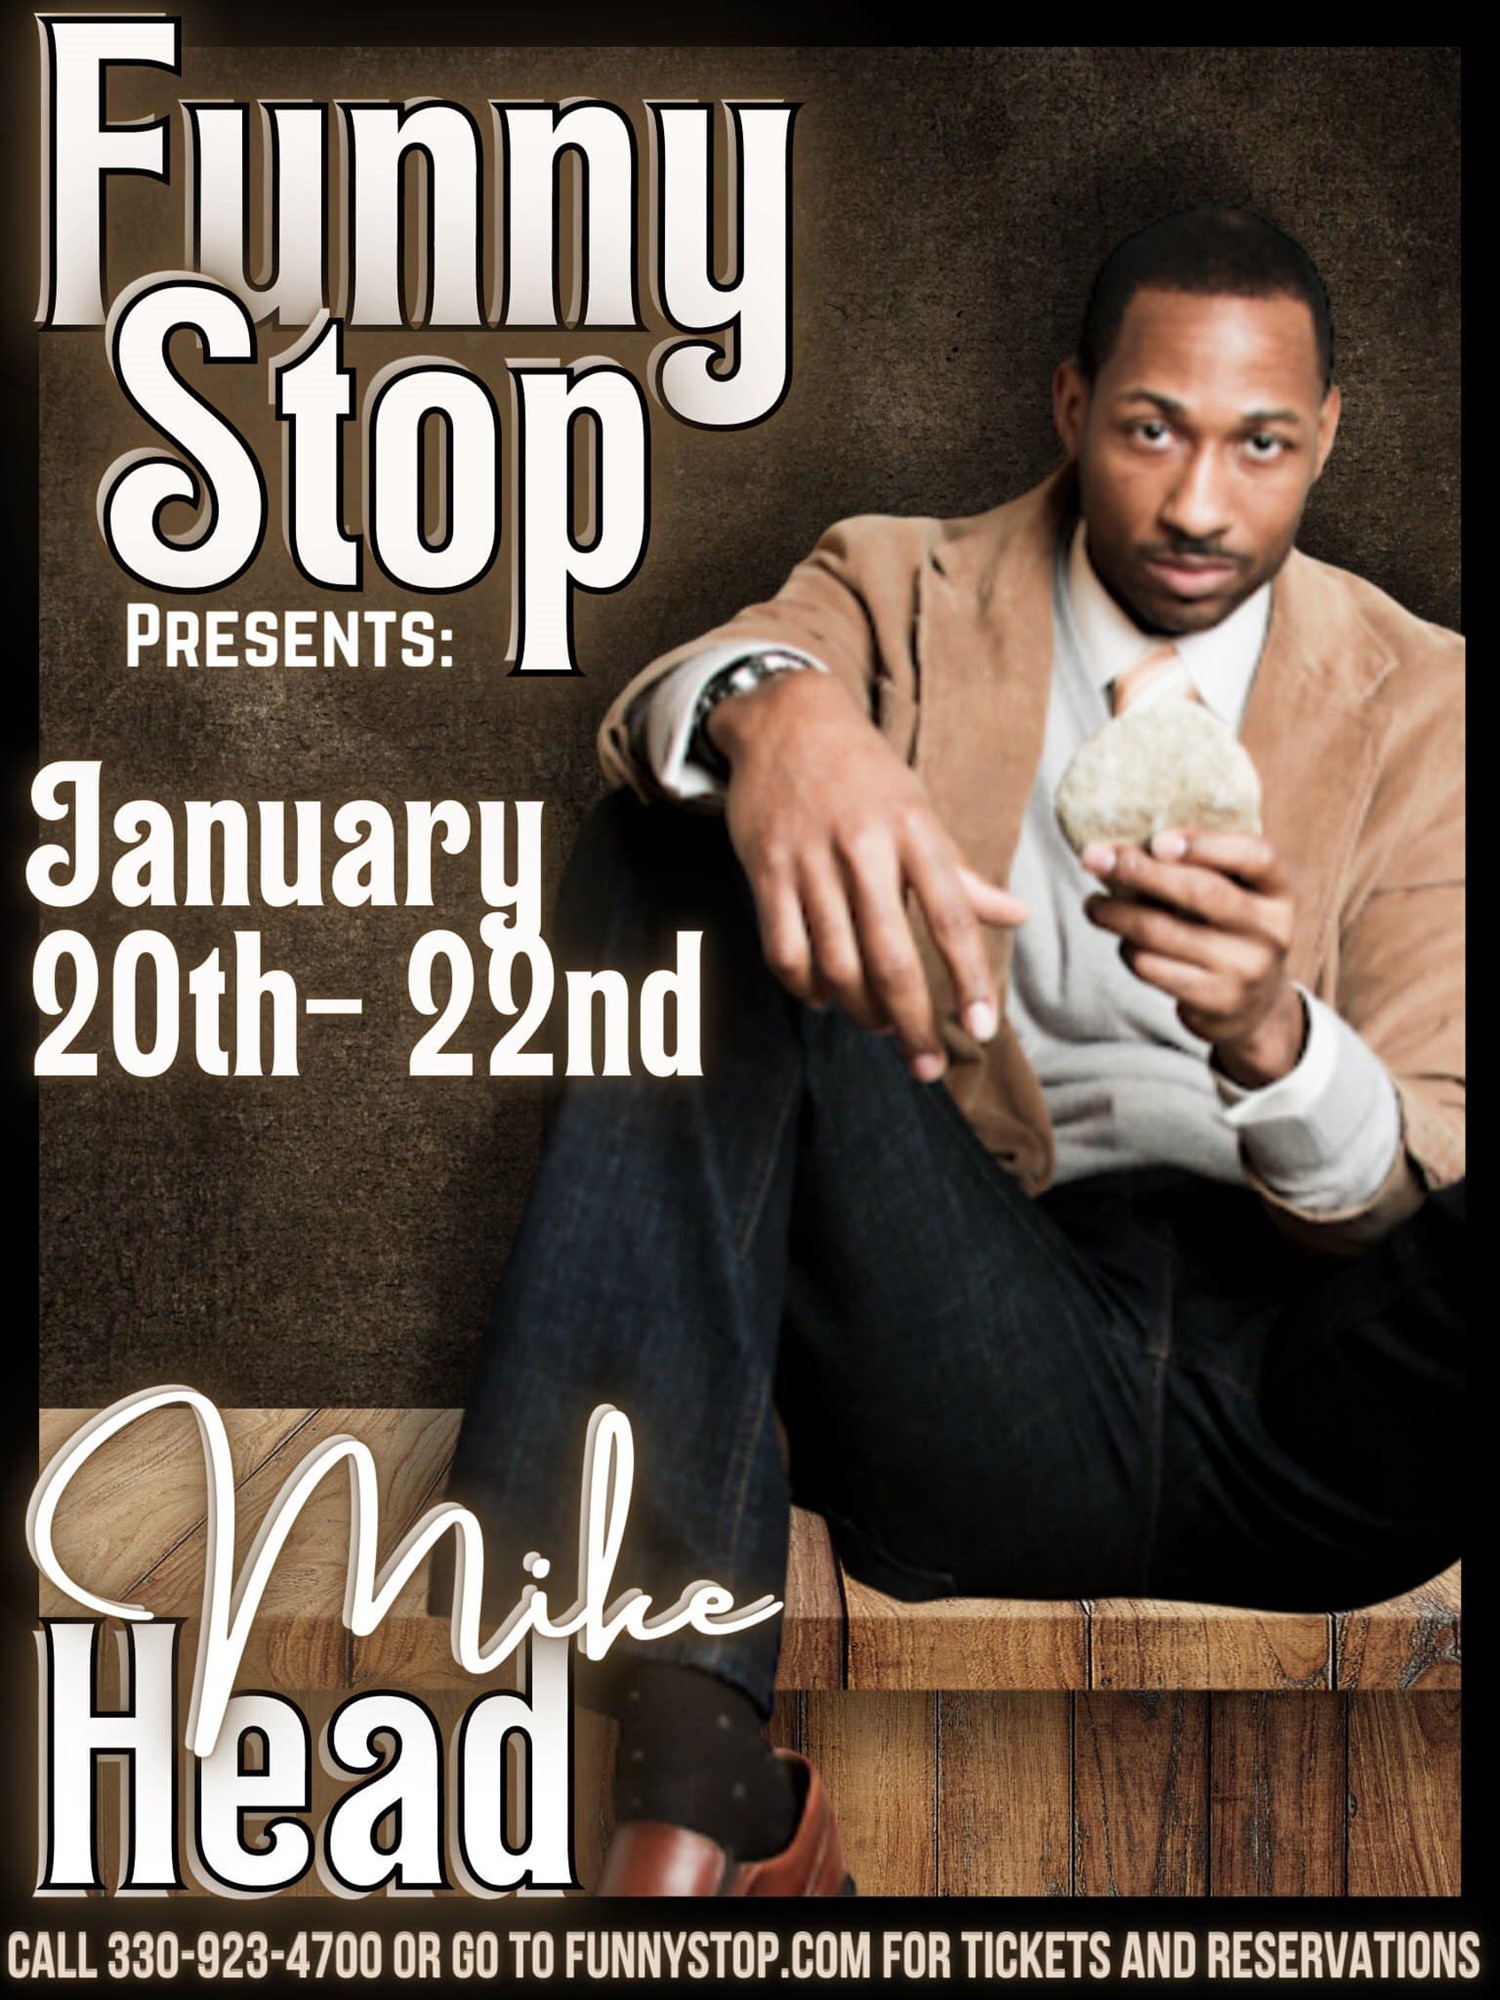 Mike Head Saturday 7:20 Show  on Jan 22, 19:20@Funny Stop Comedy Club - Buy tickets and Get information on Funny Stop funnystop.online